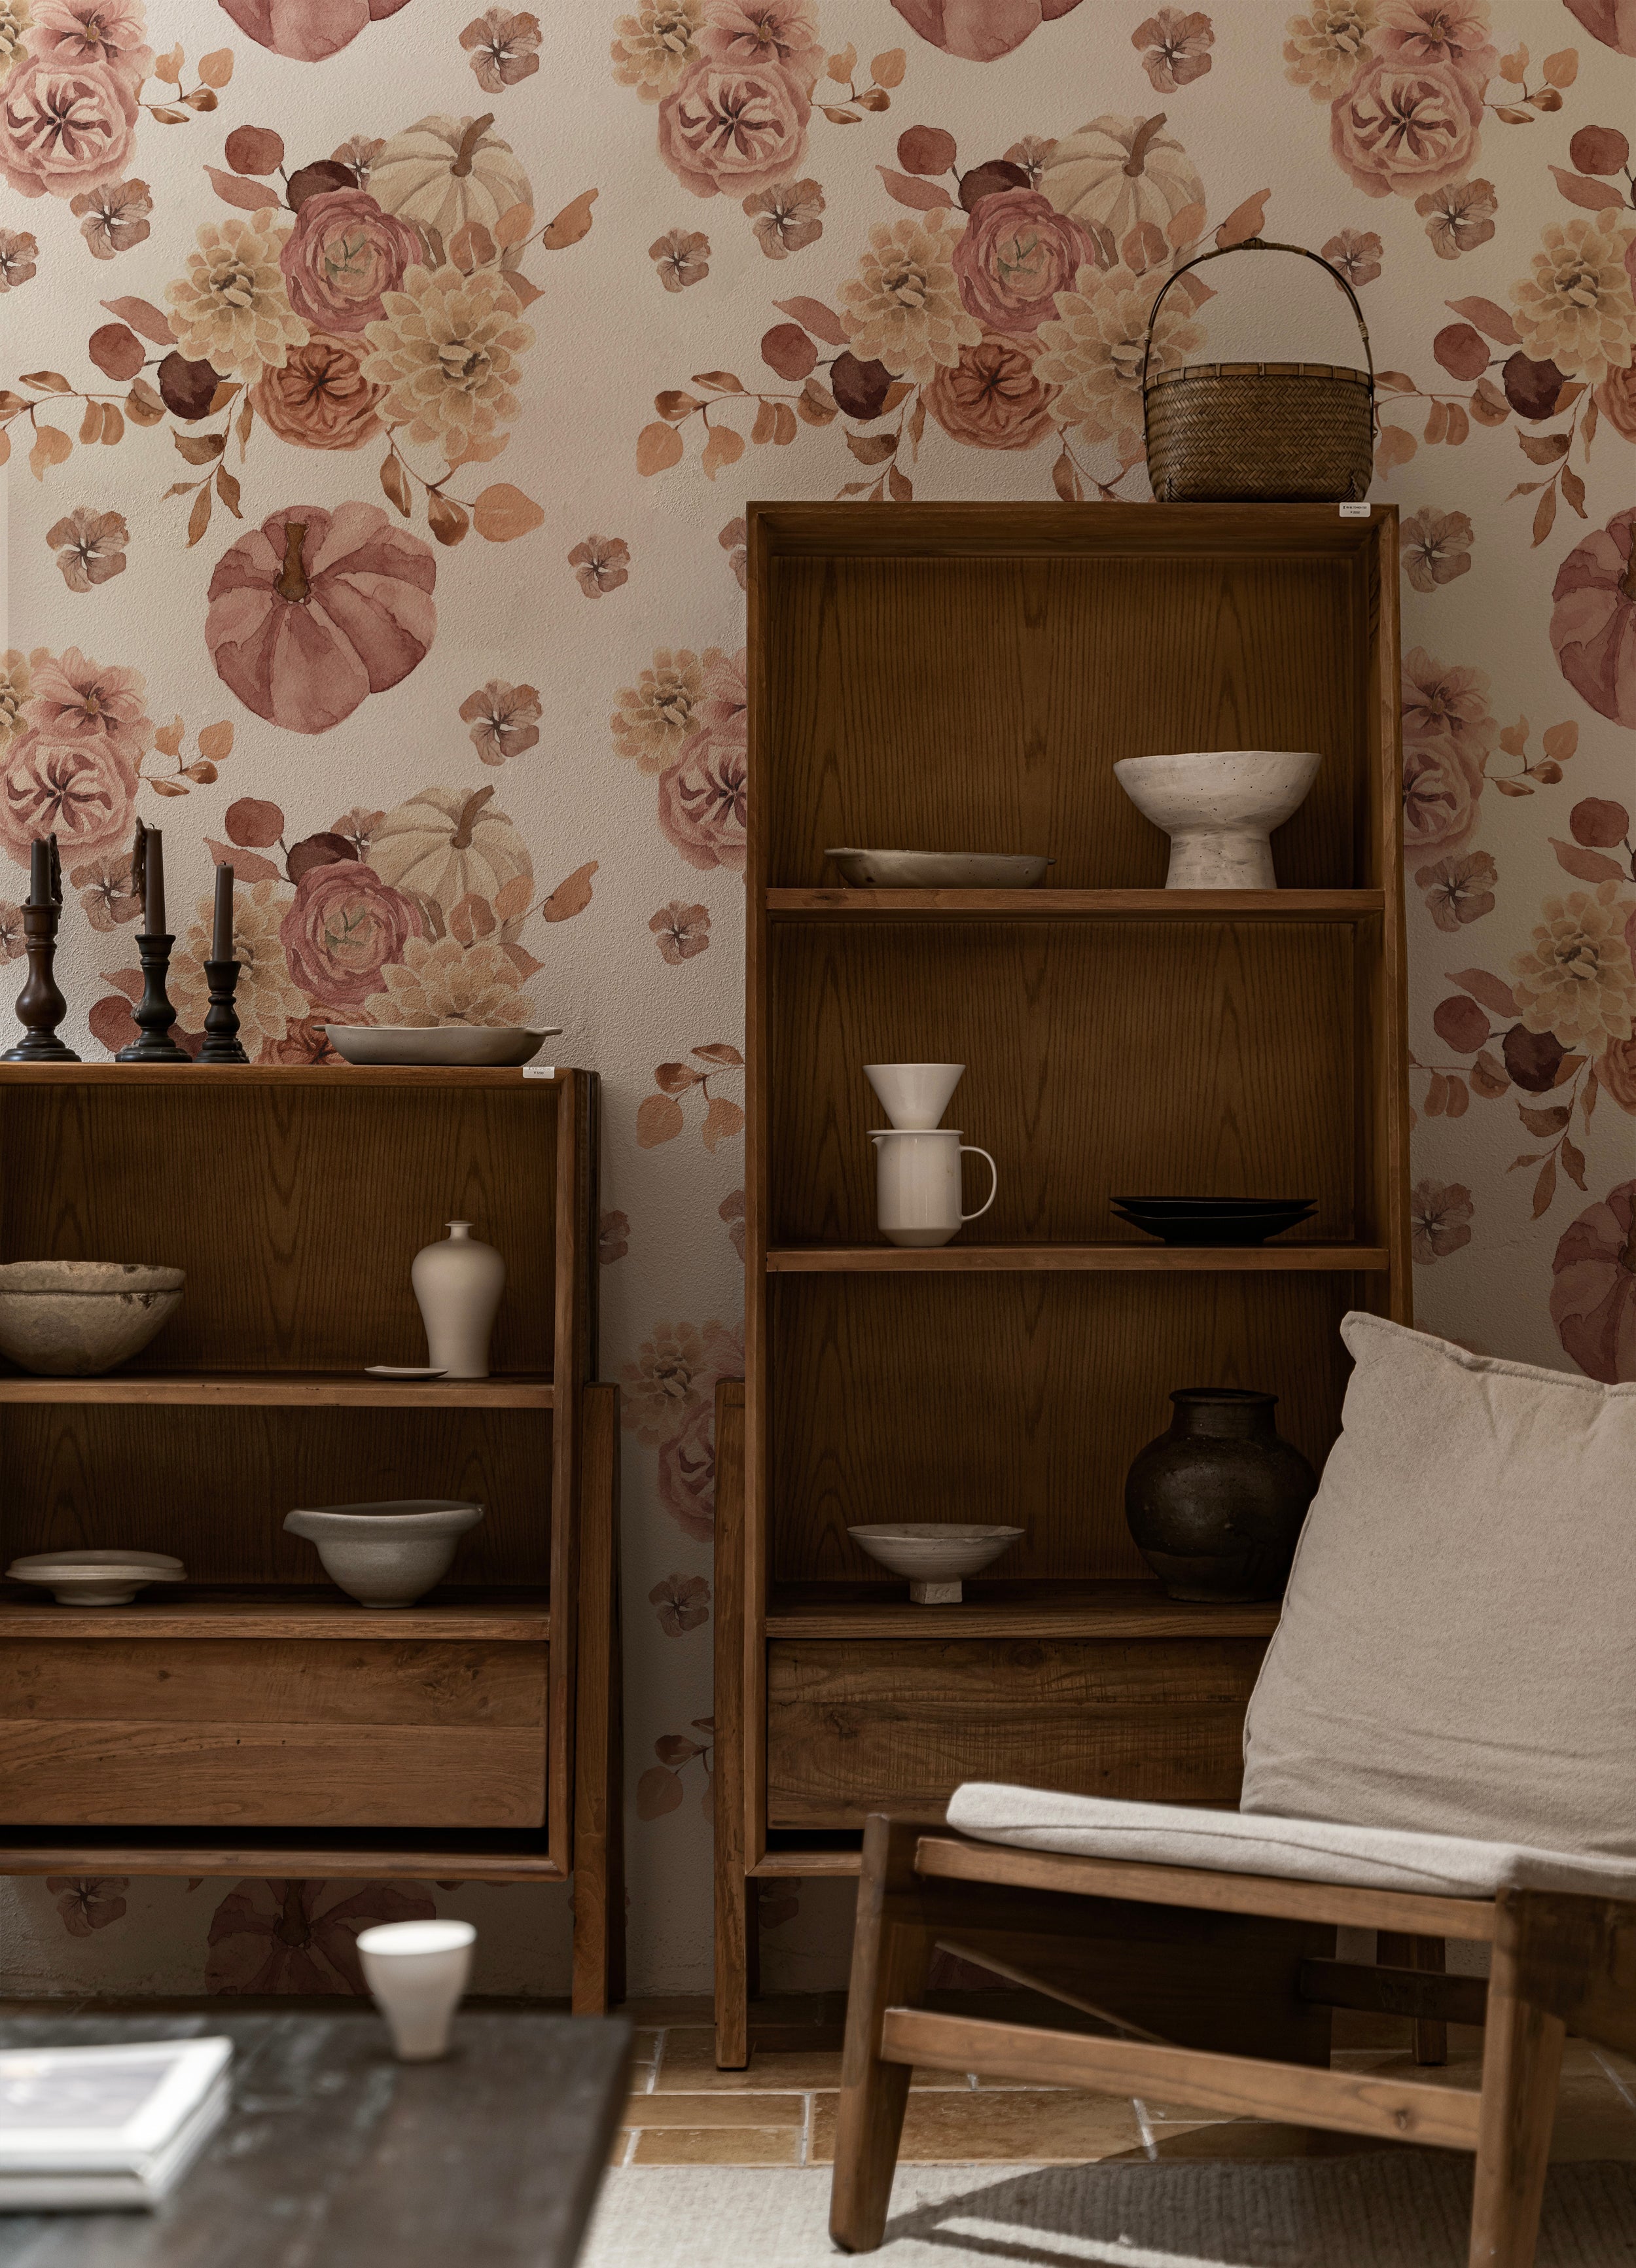 A cozy interior setting with a rustic wooden bookshelf filled with assorted pottery and candles against a wall adorned with Pumpkin Spice Wallpaper. The wallpaper features a lush, watercolor floral pattern in warm tones of pink, beige, and brown, with prominent pumpkin and flower motifs enhancing a vintage charm.